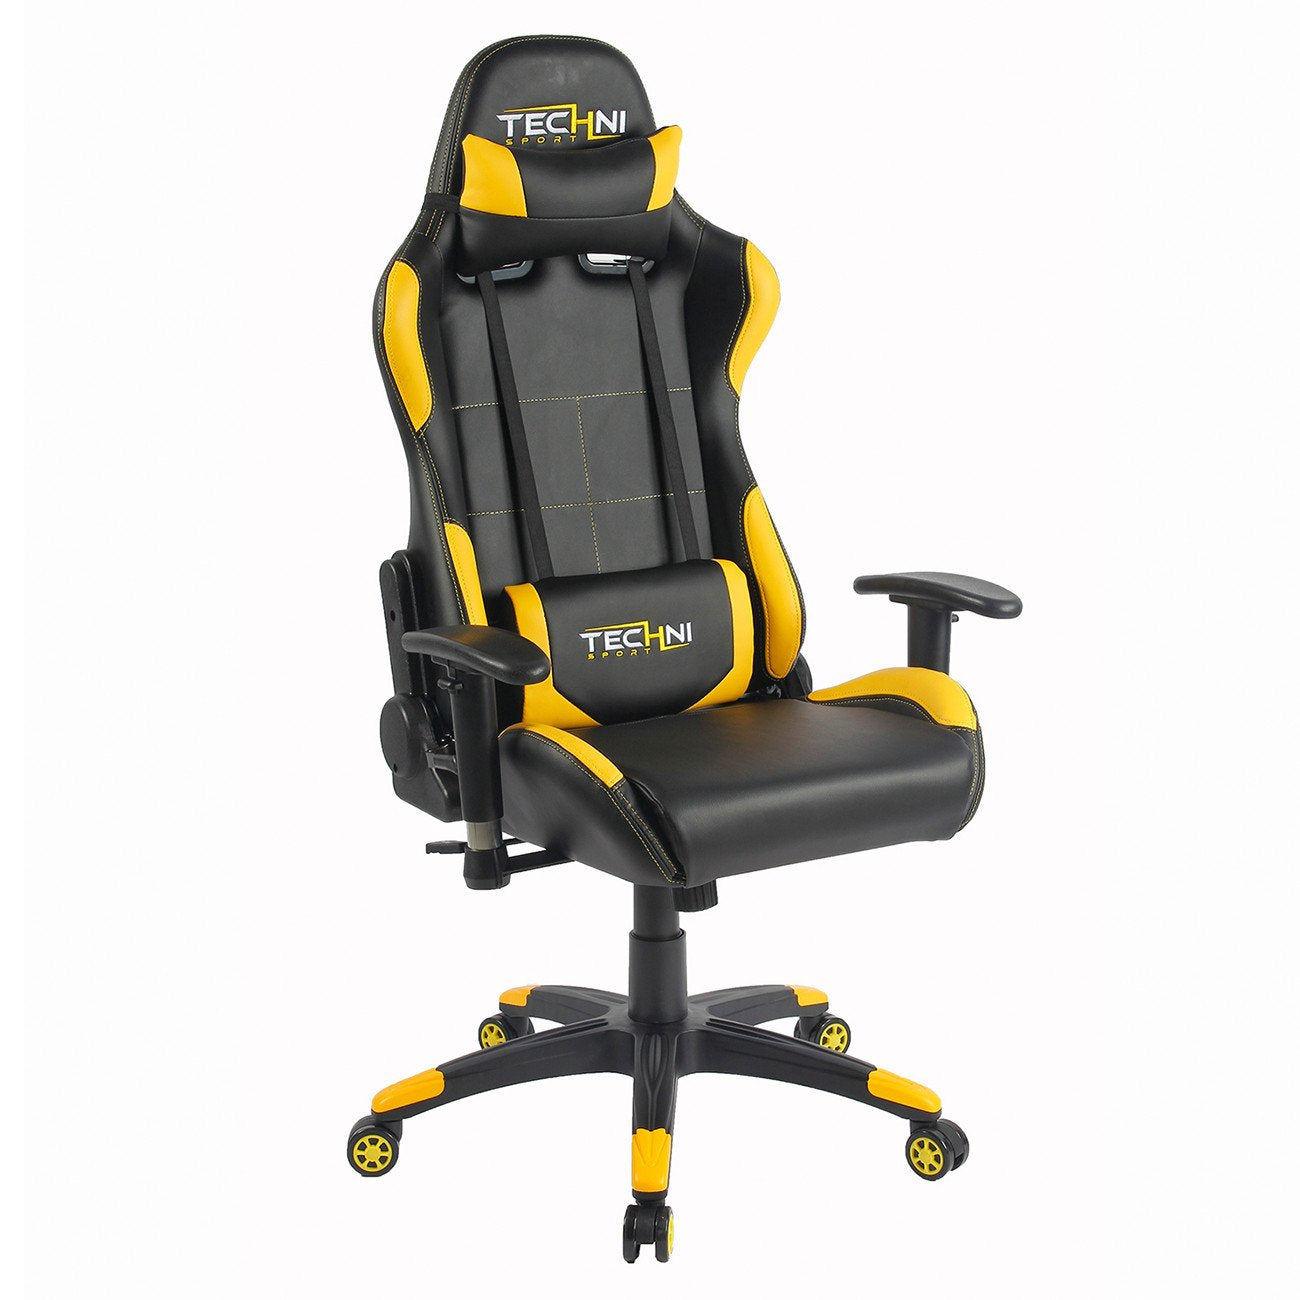 Techni Sport Rta-ts47-ylw Office-pc Gaming Chair. Color: Yellow